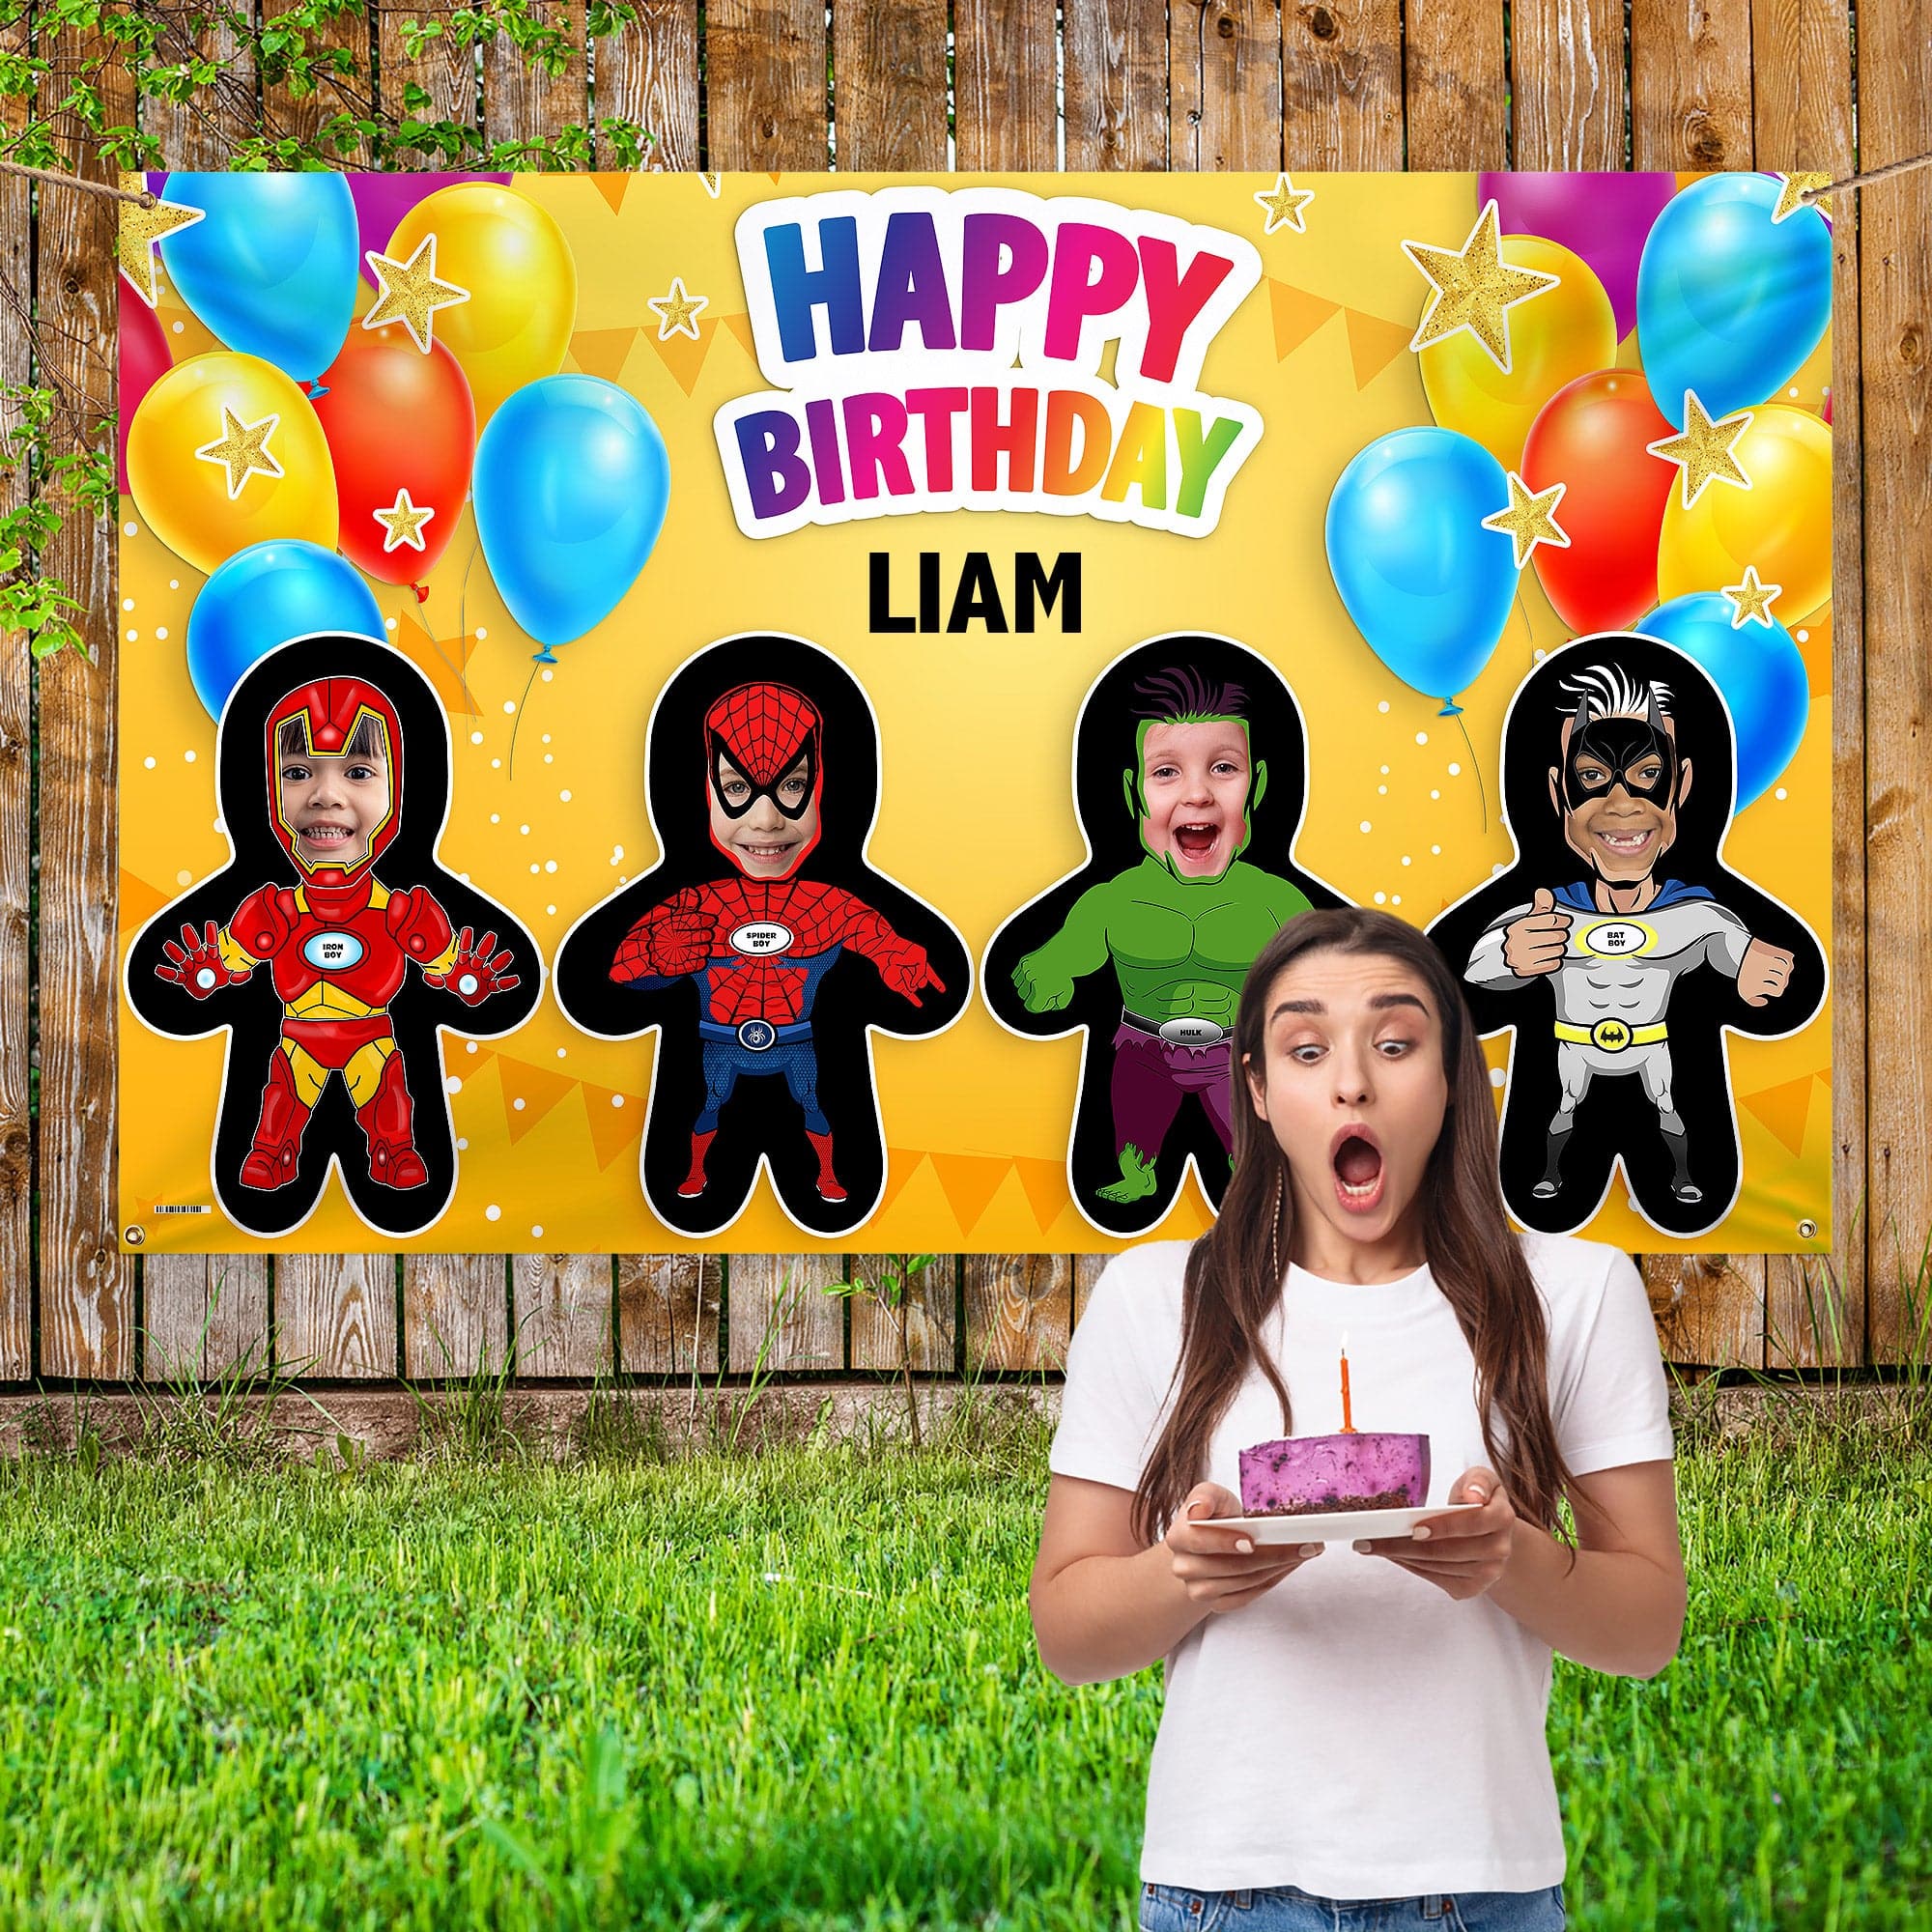 Superhero's - Mini Me World - Add Any Text And Your Face - 5FT X 3FT